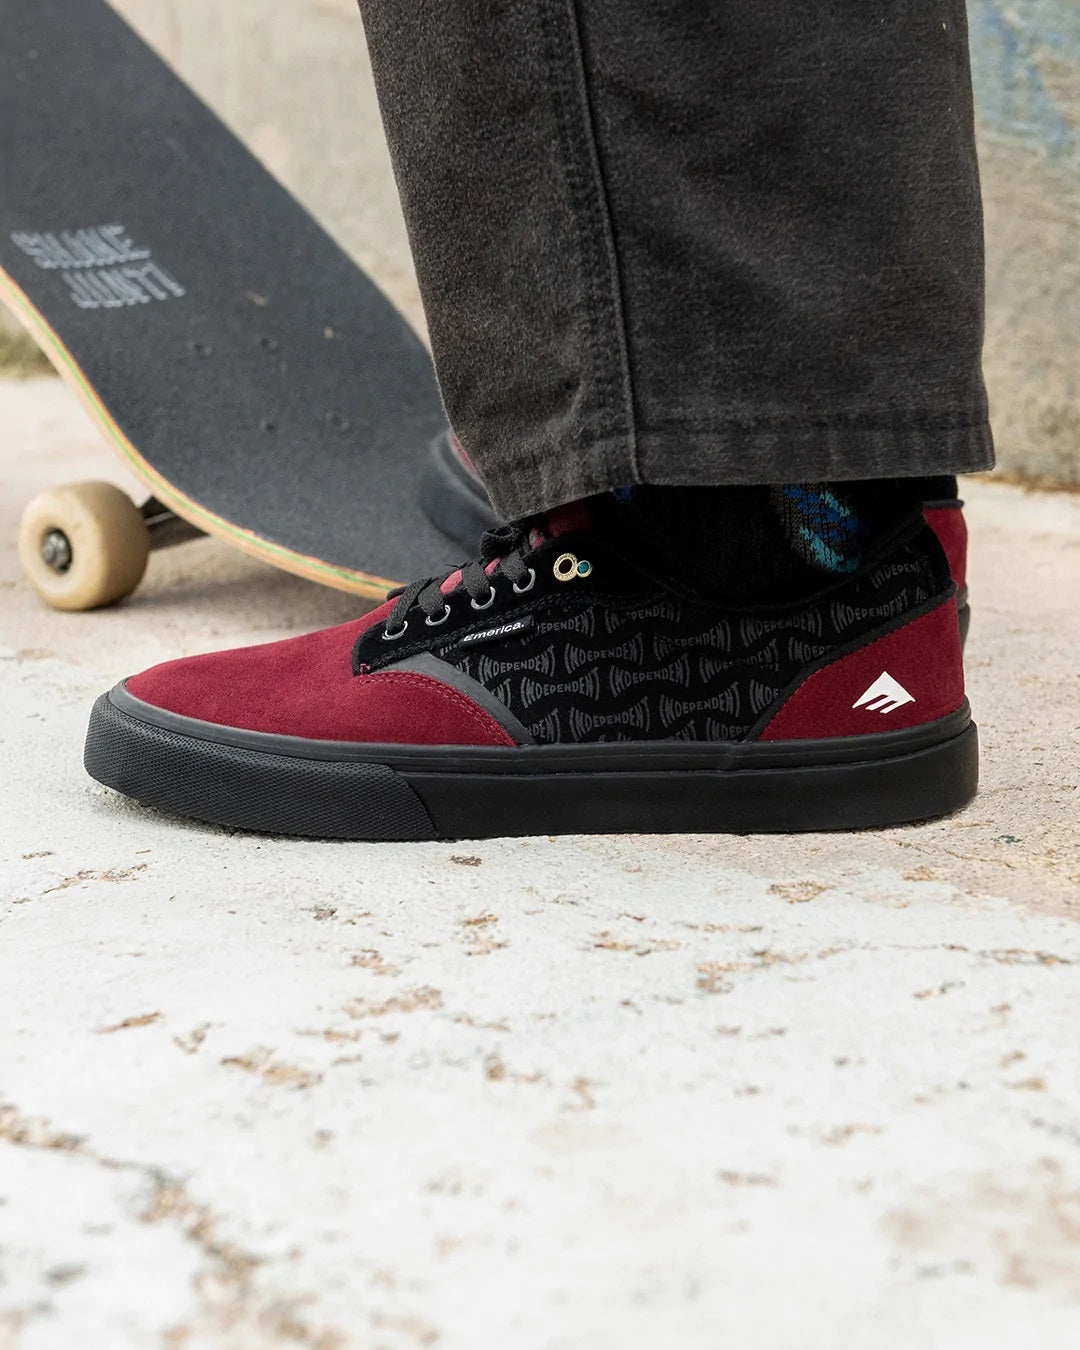 Emerica x Independent Dickson Shoe, Red Black